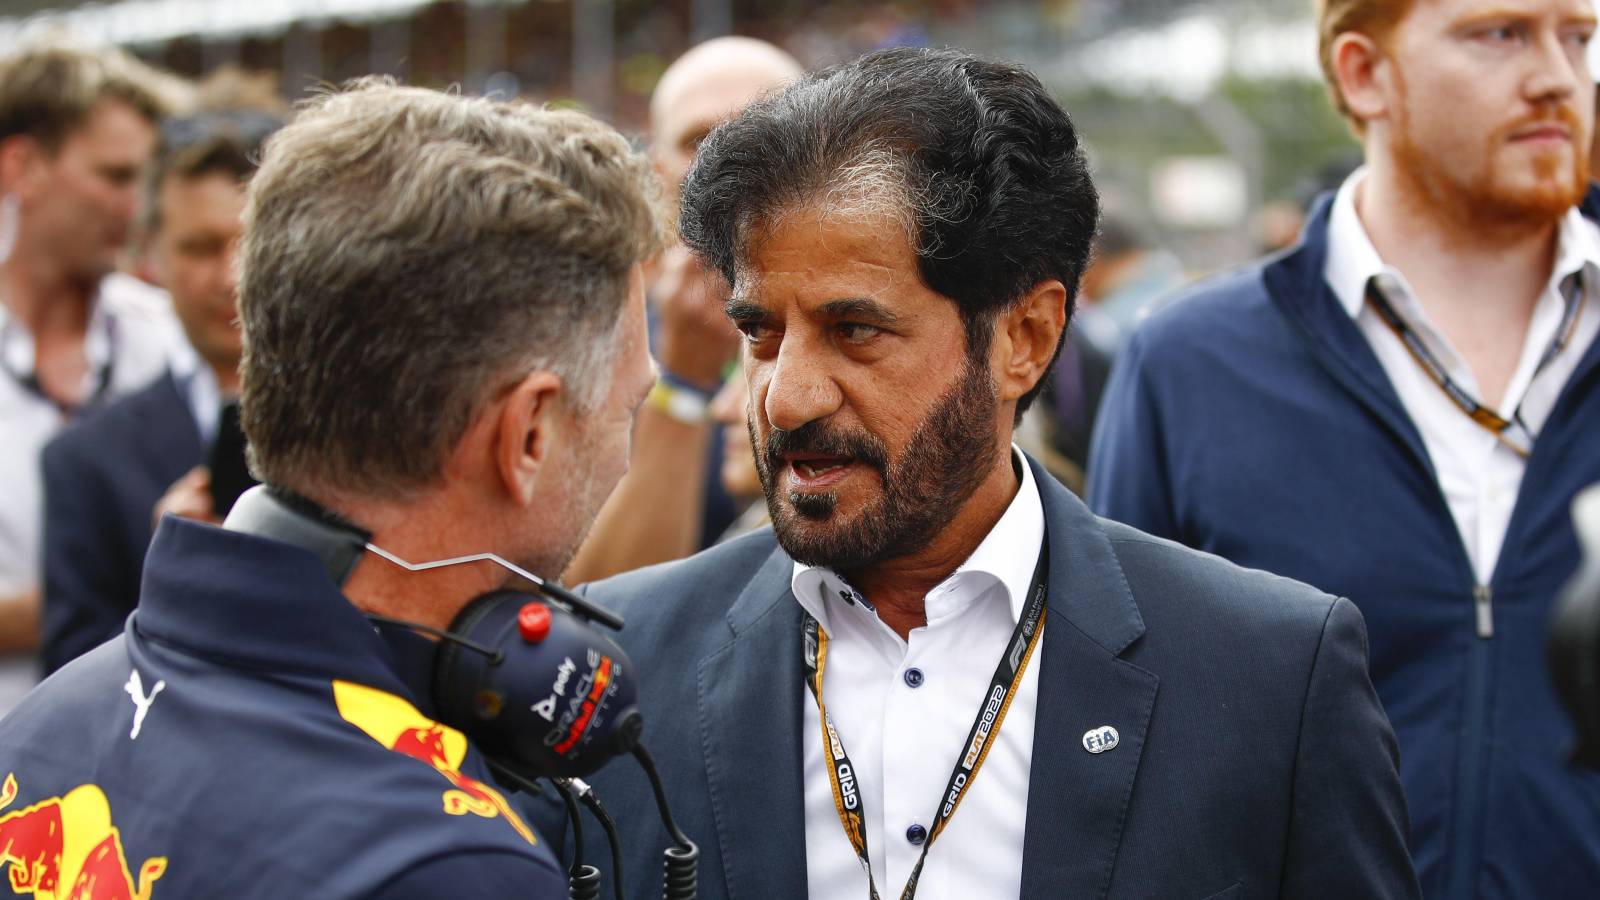 Christian Horner talking to Mohammed ben Sulayem. Silverstone July 2022.